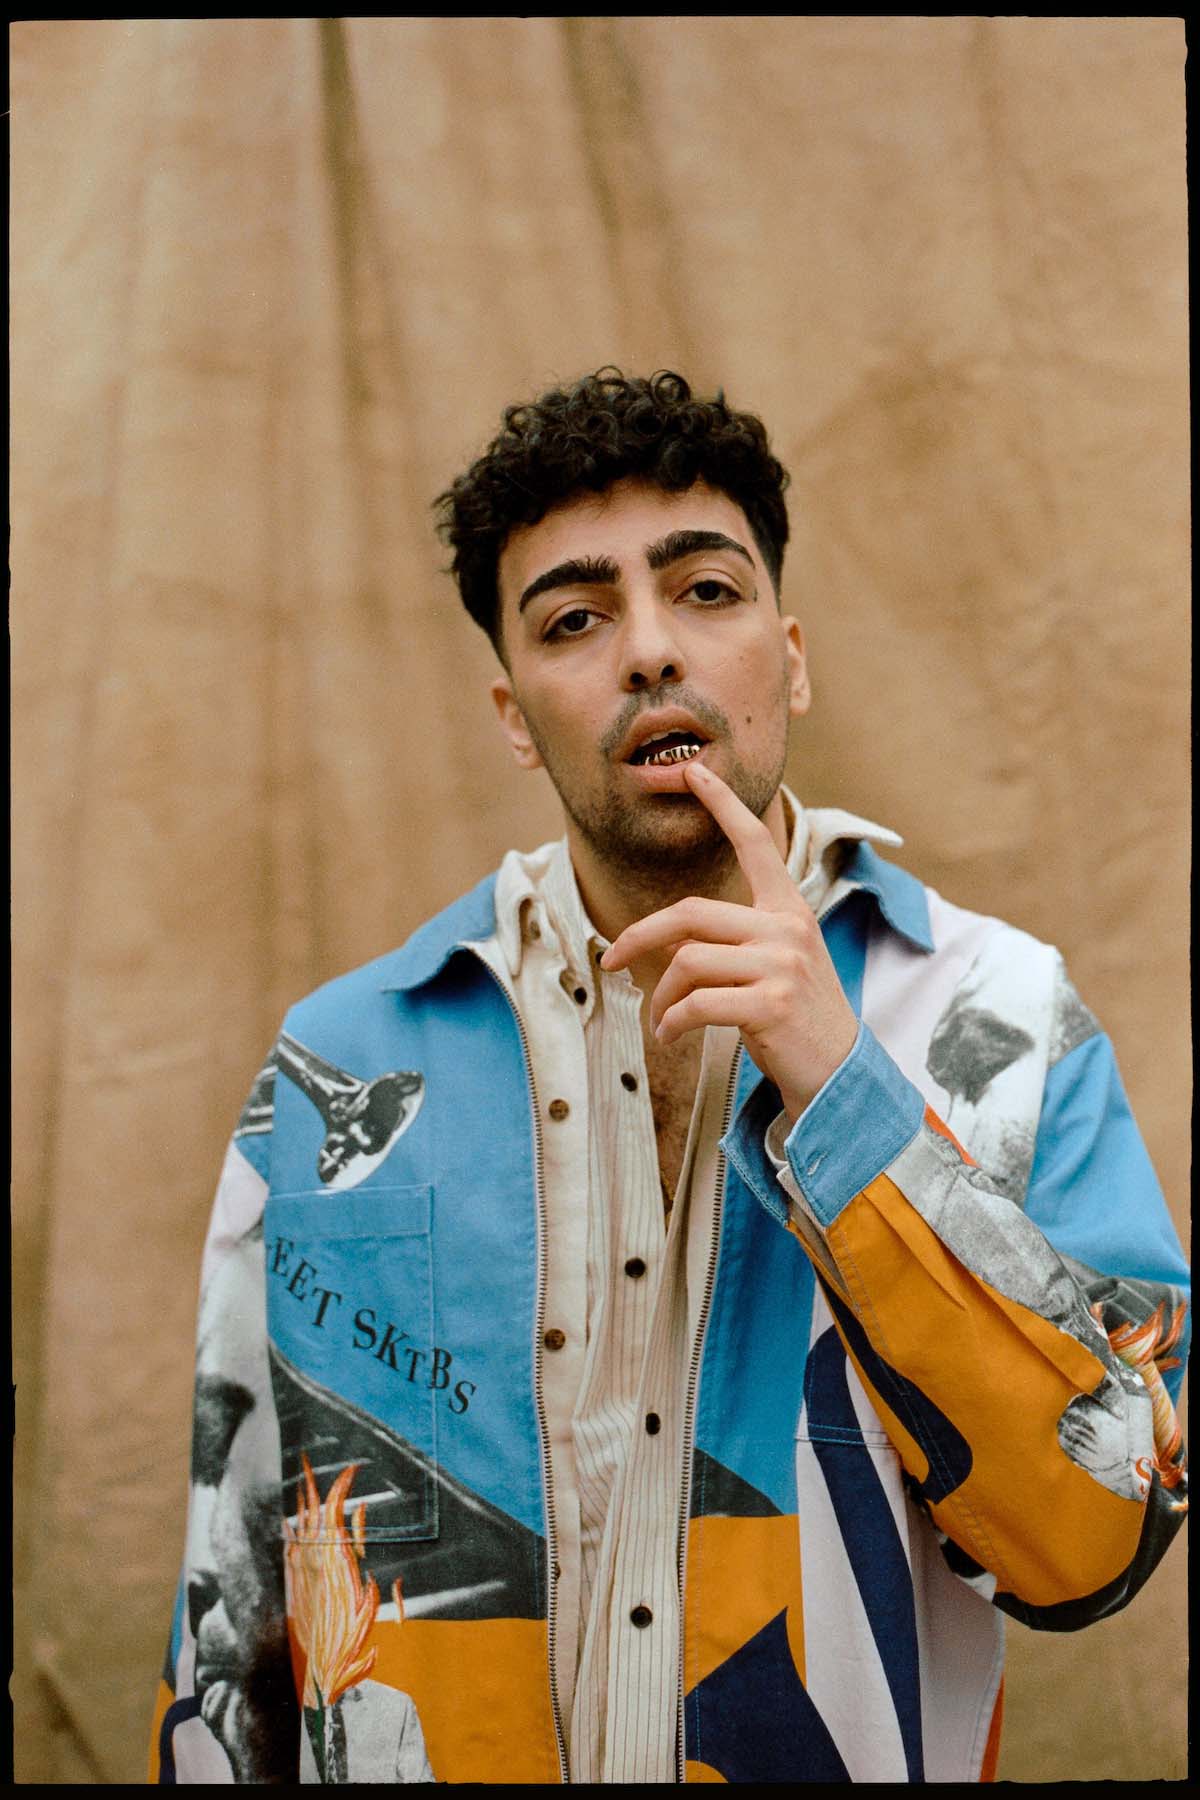 The rapper BRKN can be seen up to his waist against a brown fabric background. He has black, short curly hair, dark eyes, prominent black eyebrows, a three-day beard and he wears a blue-orange-white jacket with pictures of a torch, trumpet and a trumpet player. He looks into the camera, has his mouth slightly open and puts his left index finger to his lower lip. You can see a golden grill on his lower teeth.